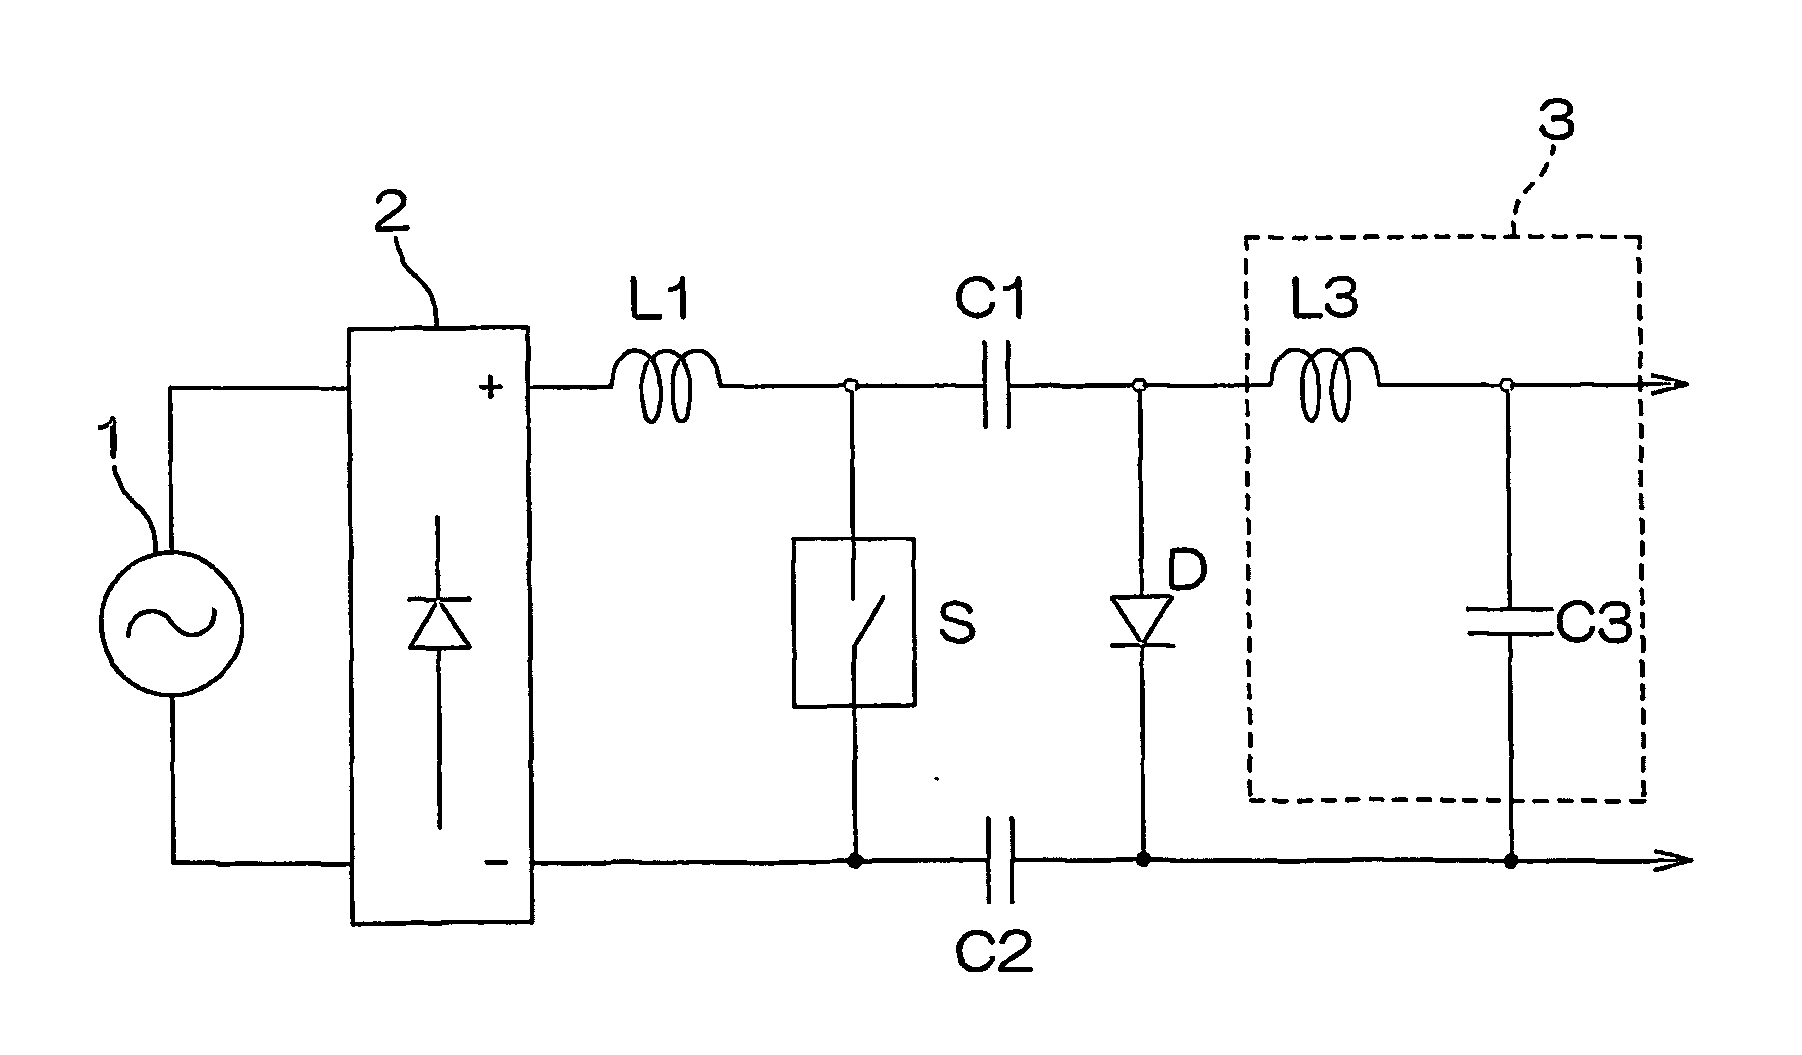 Cuk converter with inductors and capacitors on both power lines